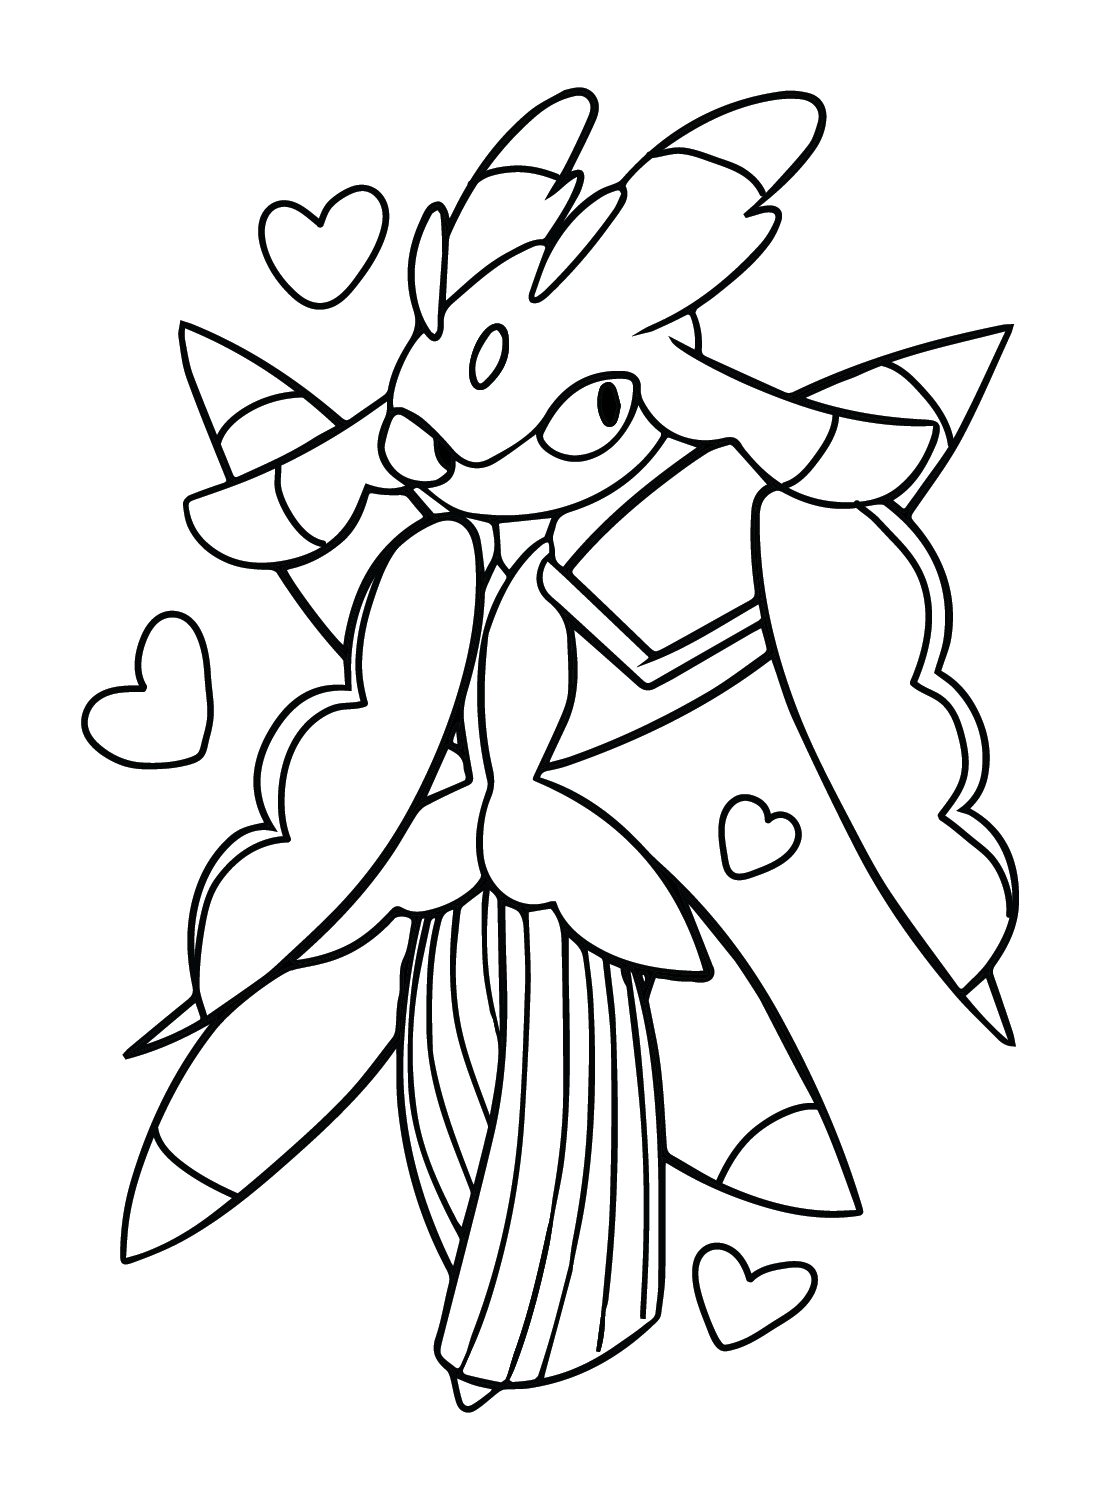 Lineart of Lurantis Coloring Page